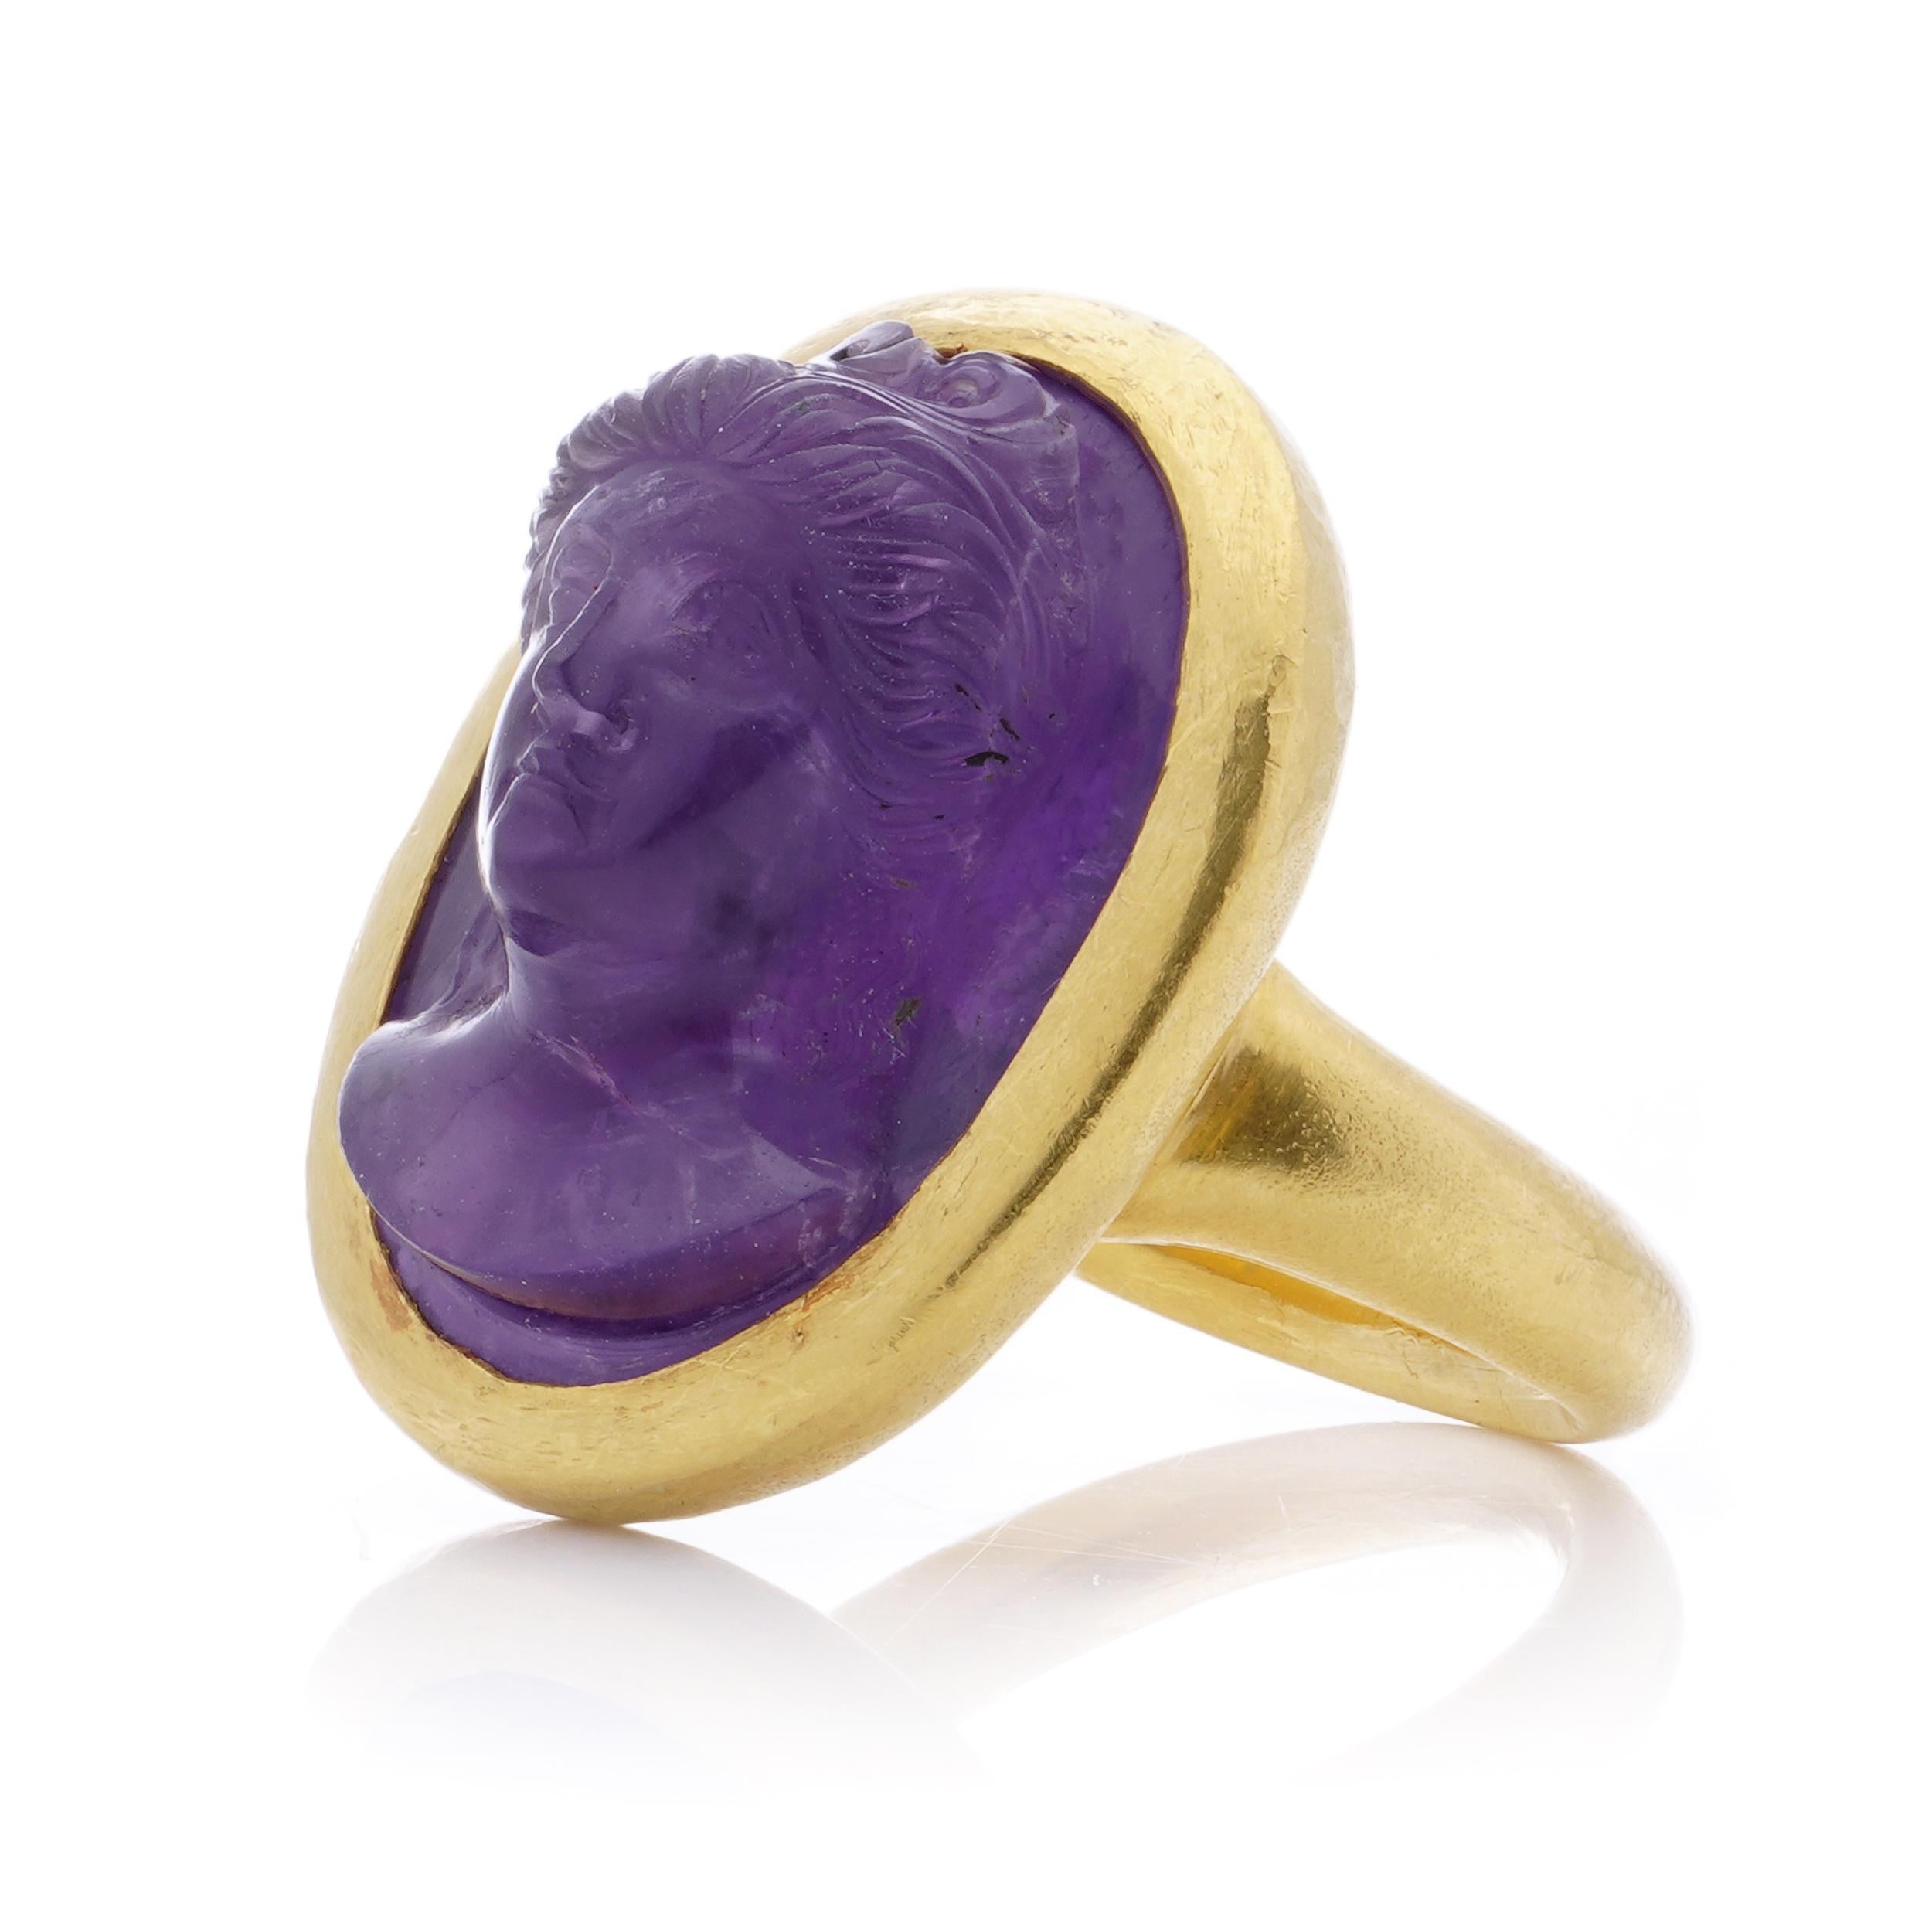  24kt. yellow gold carved amethyst intaglio ring with a woman's portrait For Sale 1